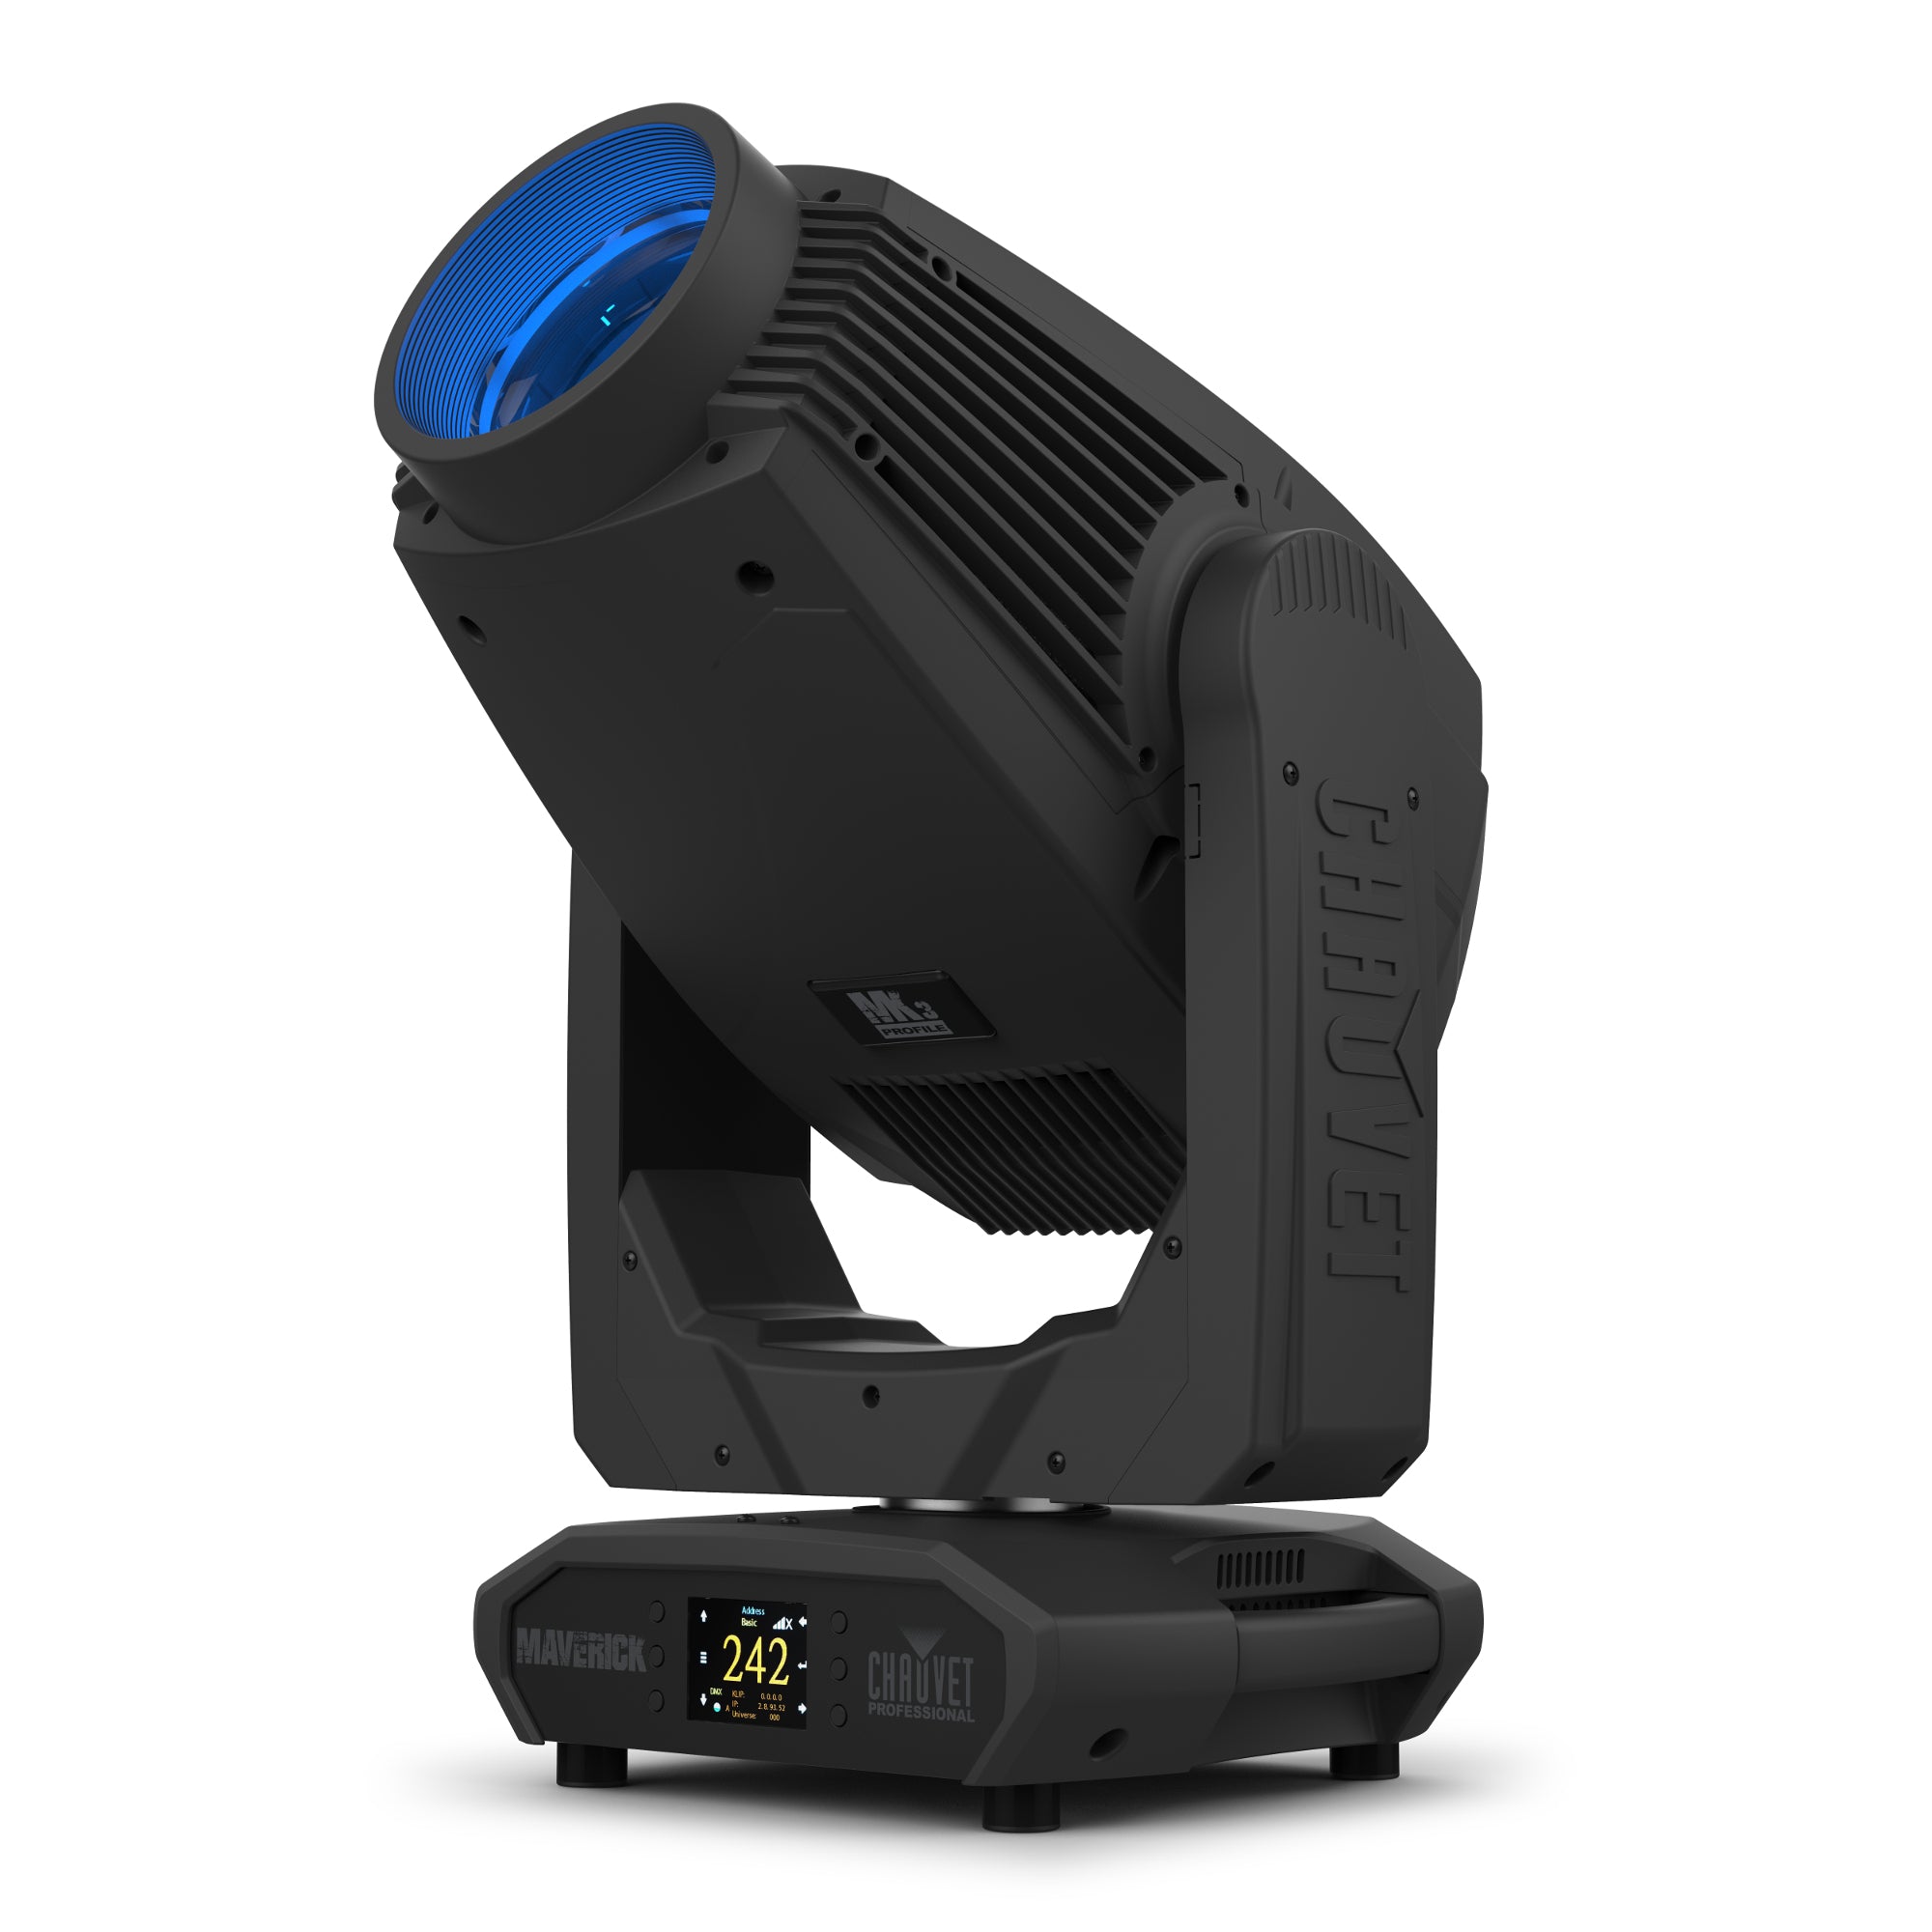 Chauvet Pro Maverick MK3 Profile 820W LED Moving Head With Zoom, Framing Shutters And CMY Color Mixing